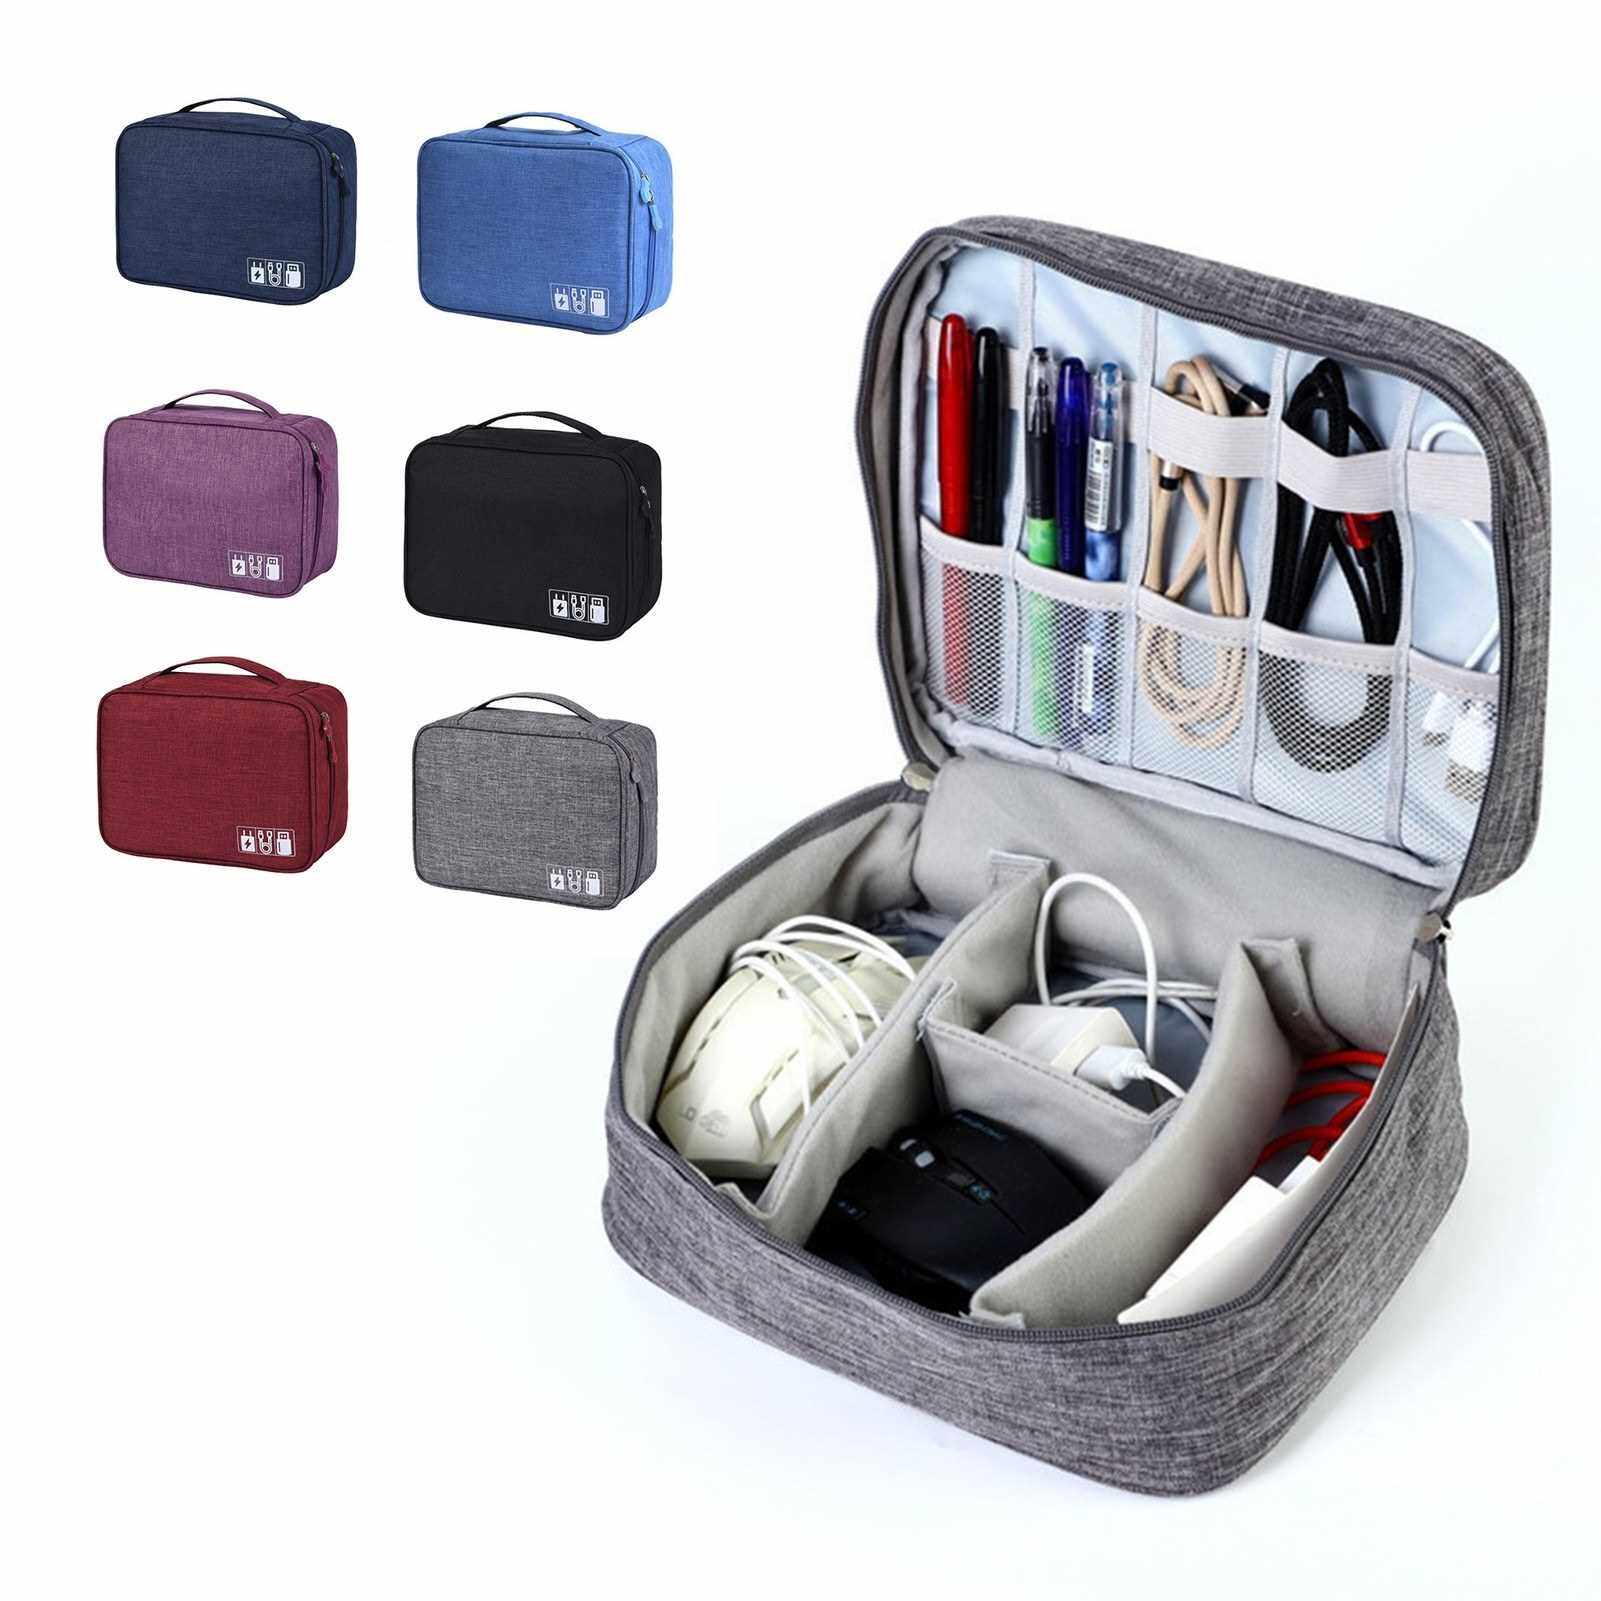 BEST SELLER Electronics Organizer Travel Bag for Cable Accessories Storage Bag Pouch Free Separated Space Waterproof for Cable Cord Charger Hard Drive Earphone Power Bank (Red)